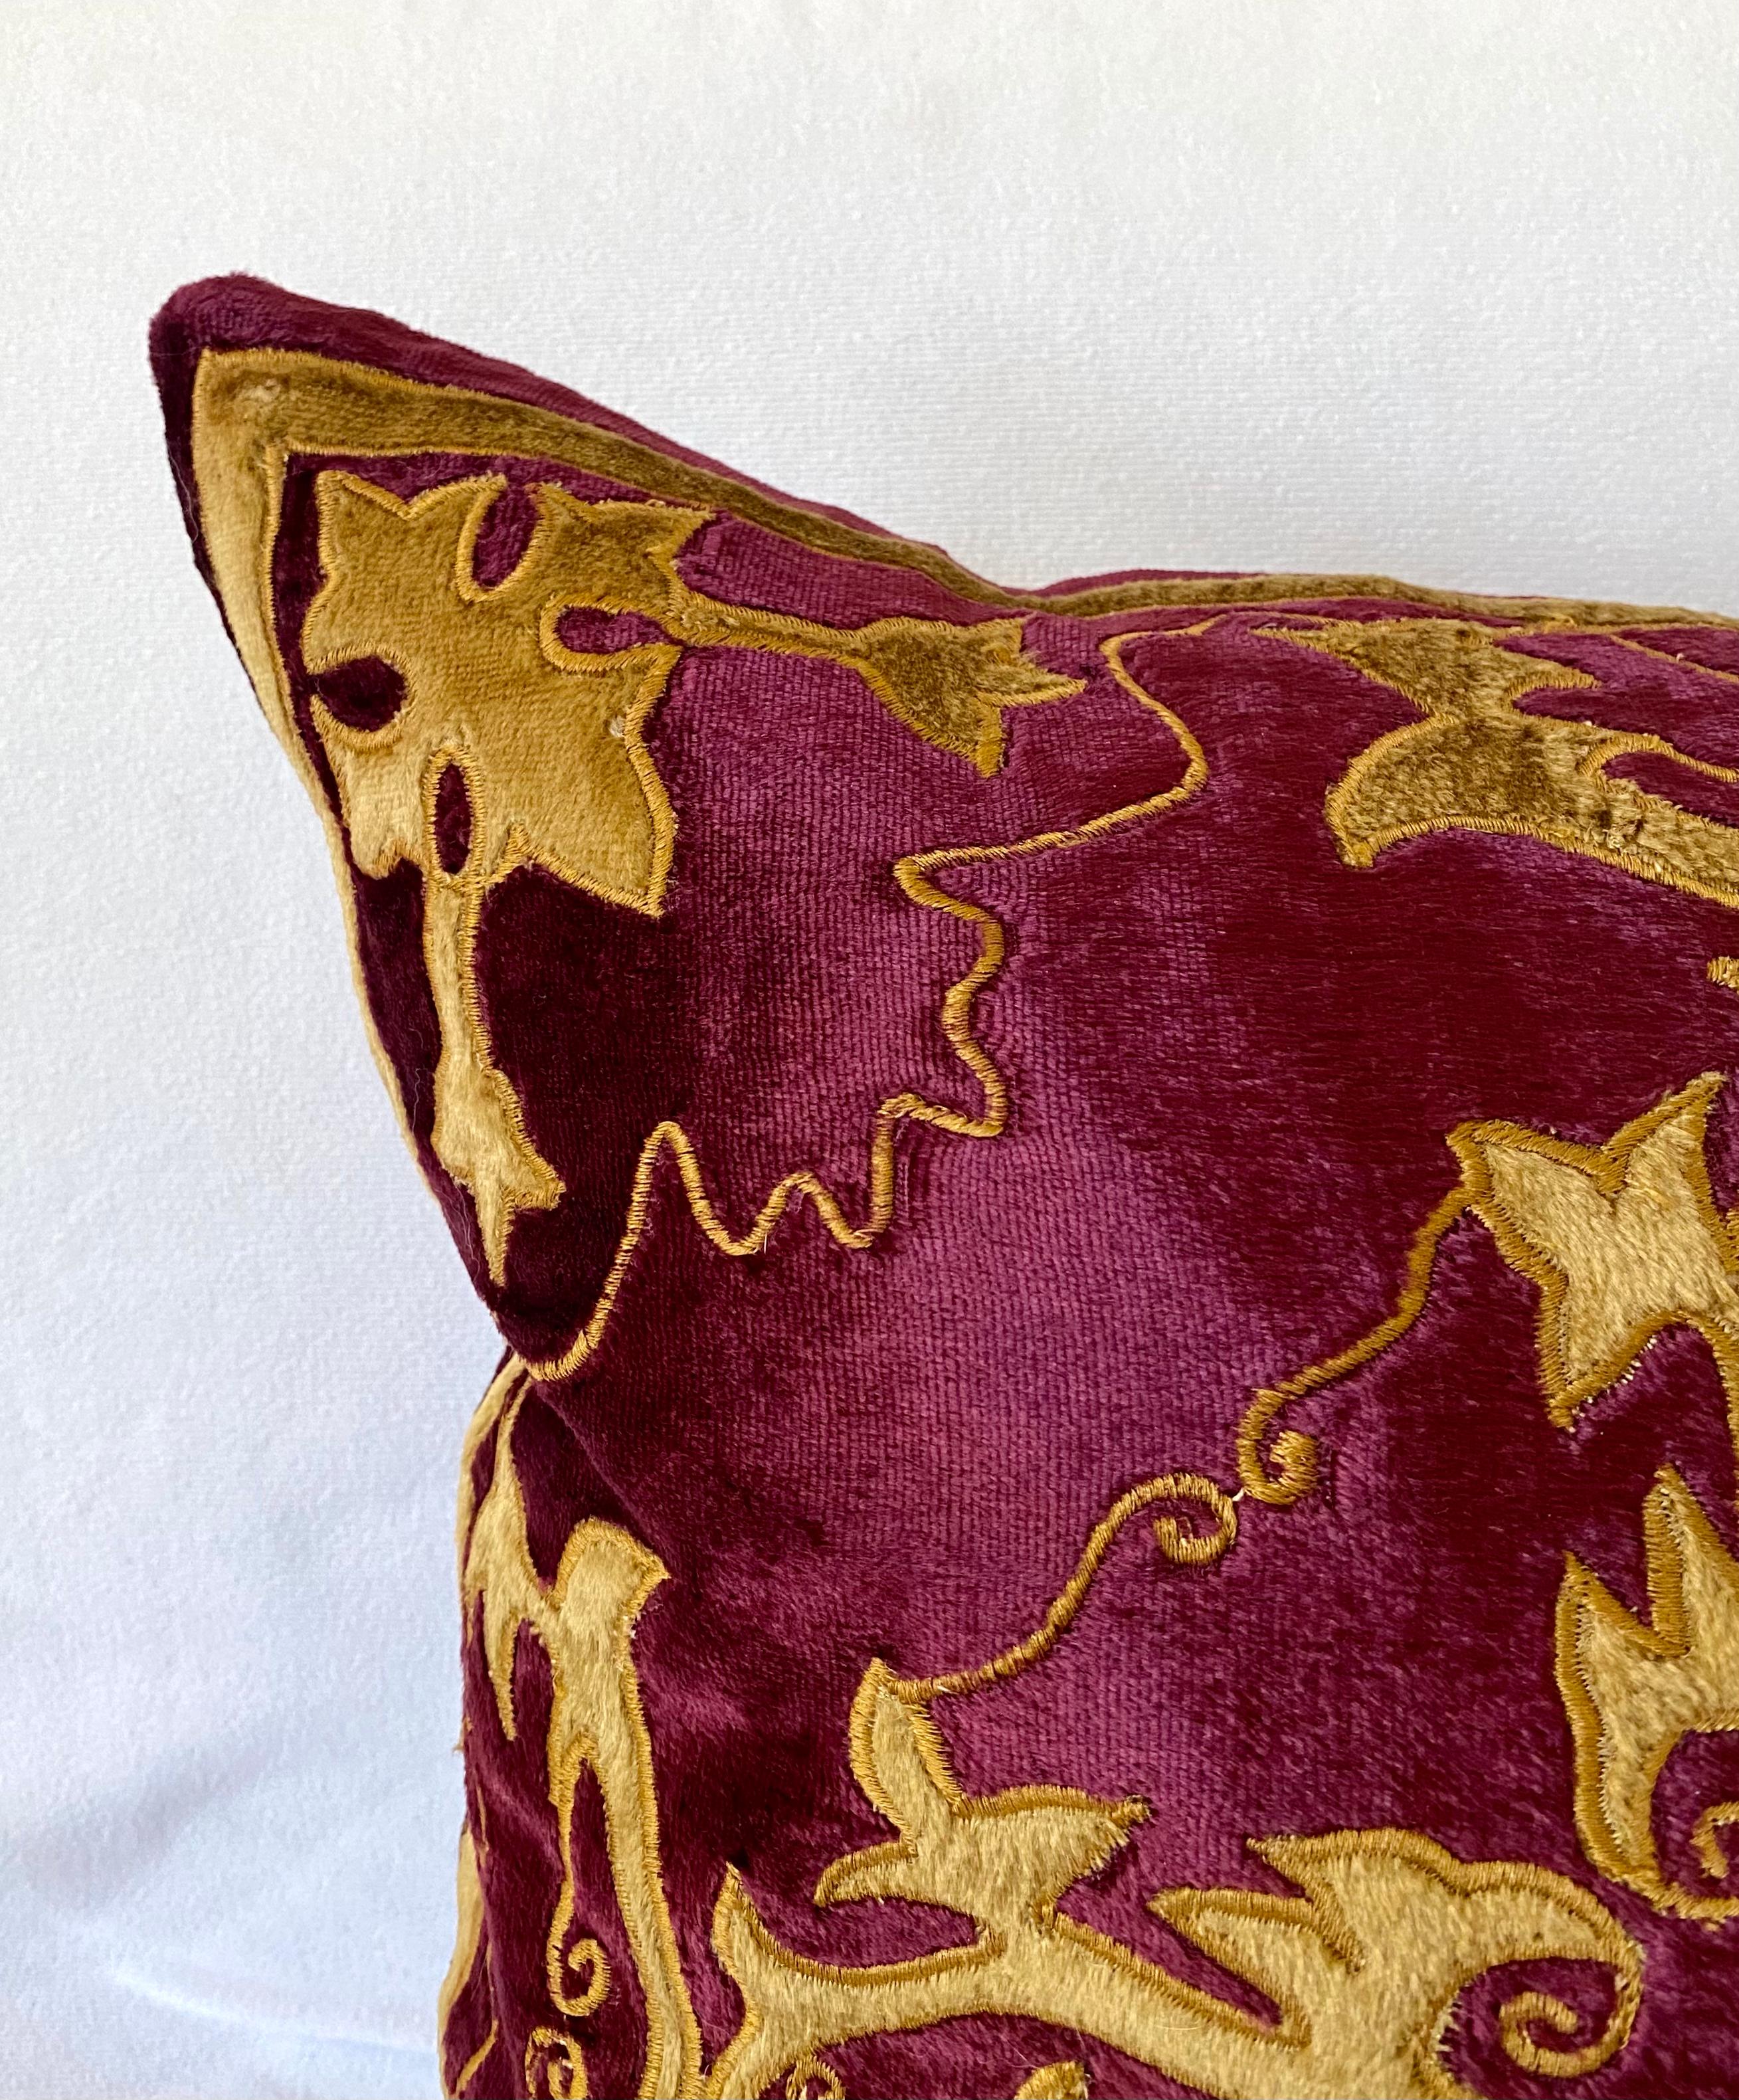 The claret color silky velvet pillow is elaborately decorated with baroque style applique work
in gold velvet outlined with gold embroidery. The pillow is filled with a mix of 50% down and
50% feathers. 

 